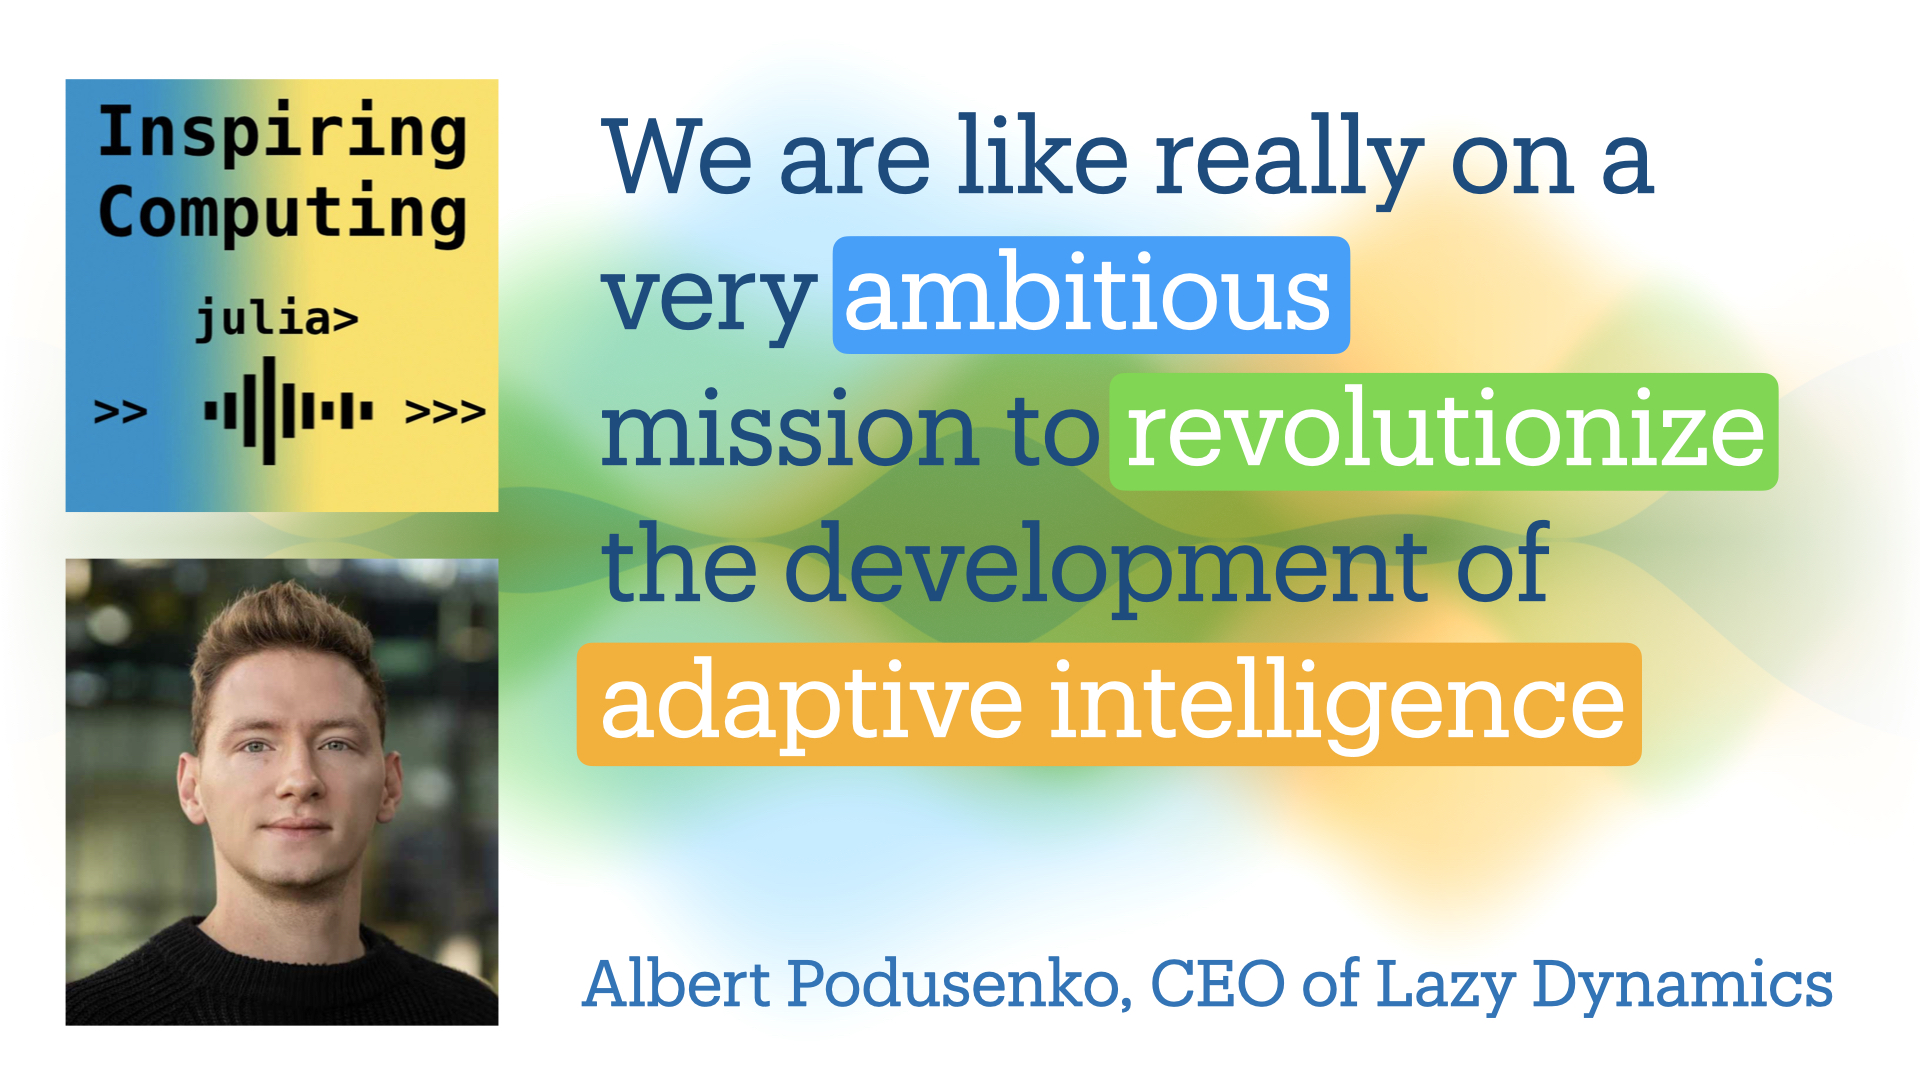 CEO of Lazy Dynamics Albert Podusenko featured on Inspiring Computing podcast